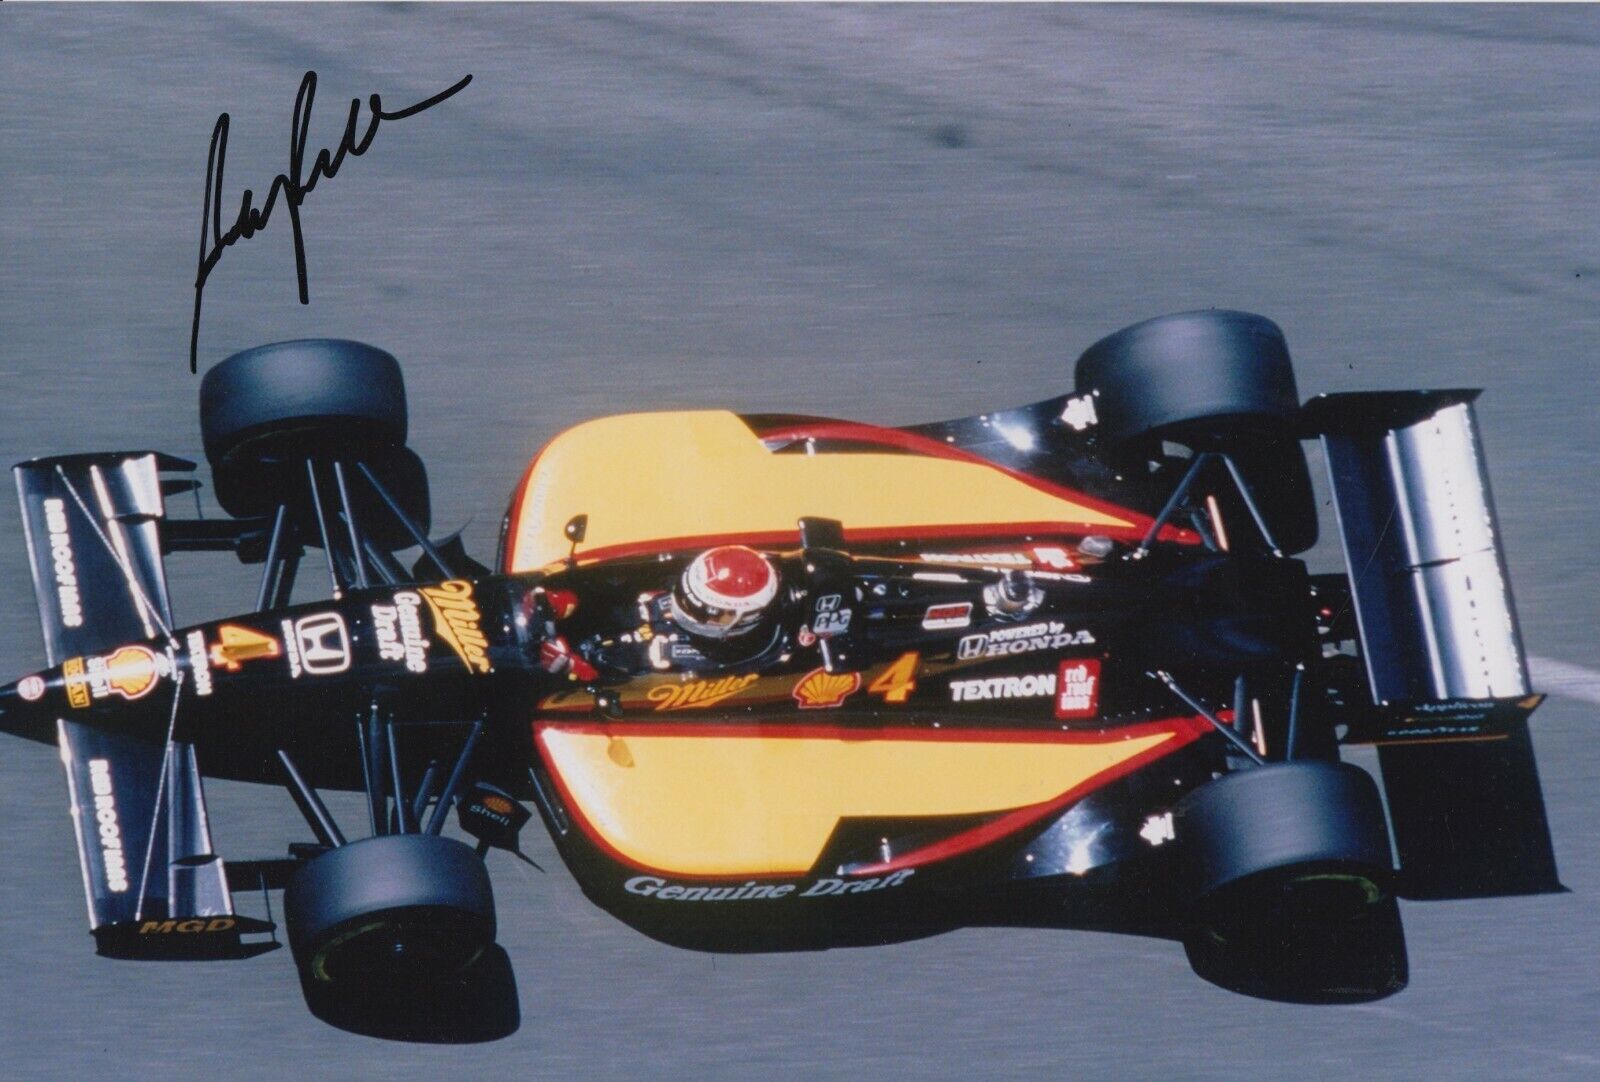 Bobby Rahal Hand Signed 12x8 Photo Poster painting - Indy 500 Autograph.